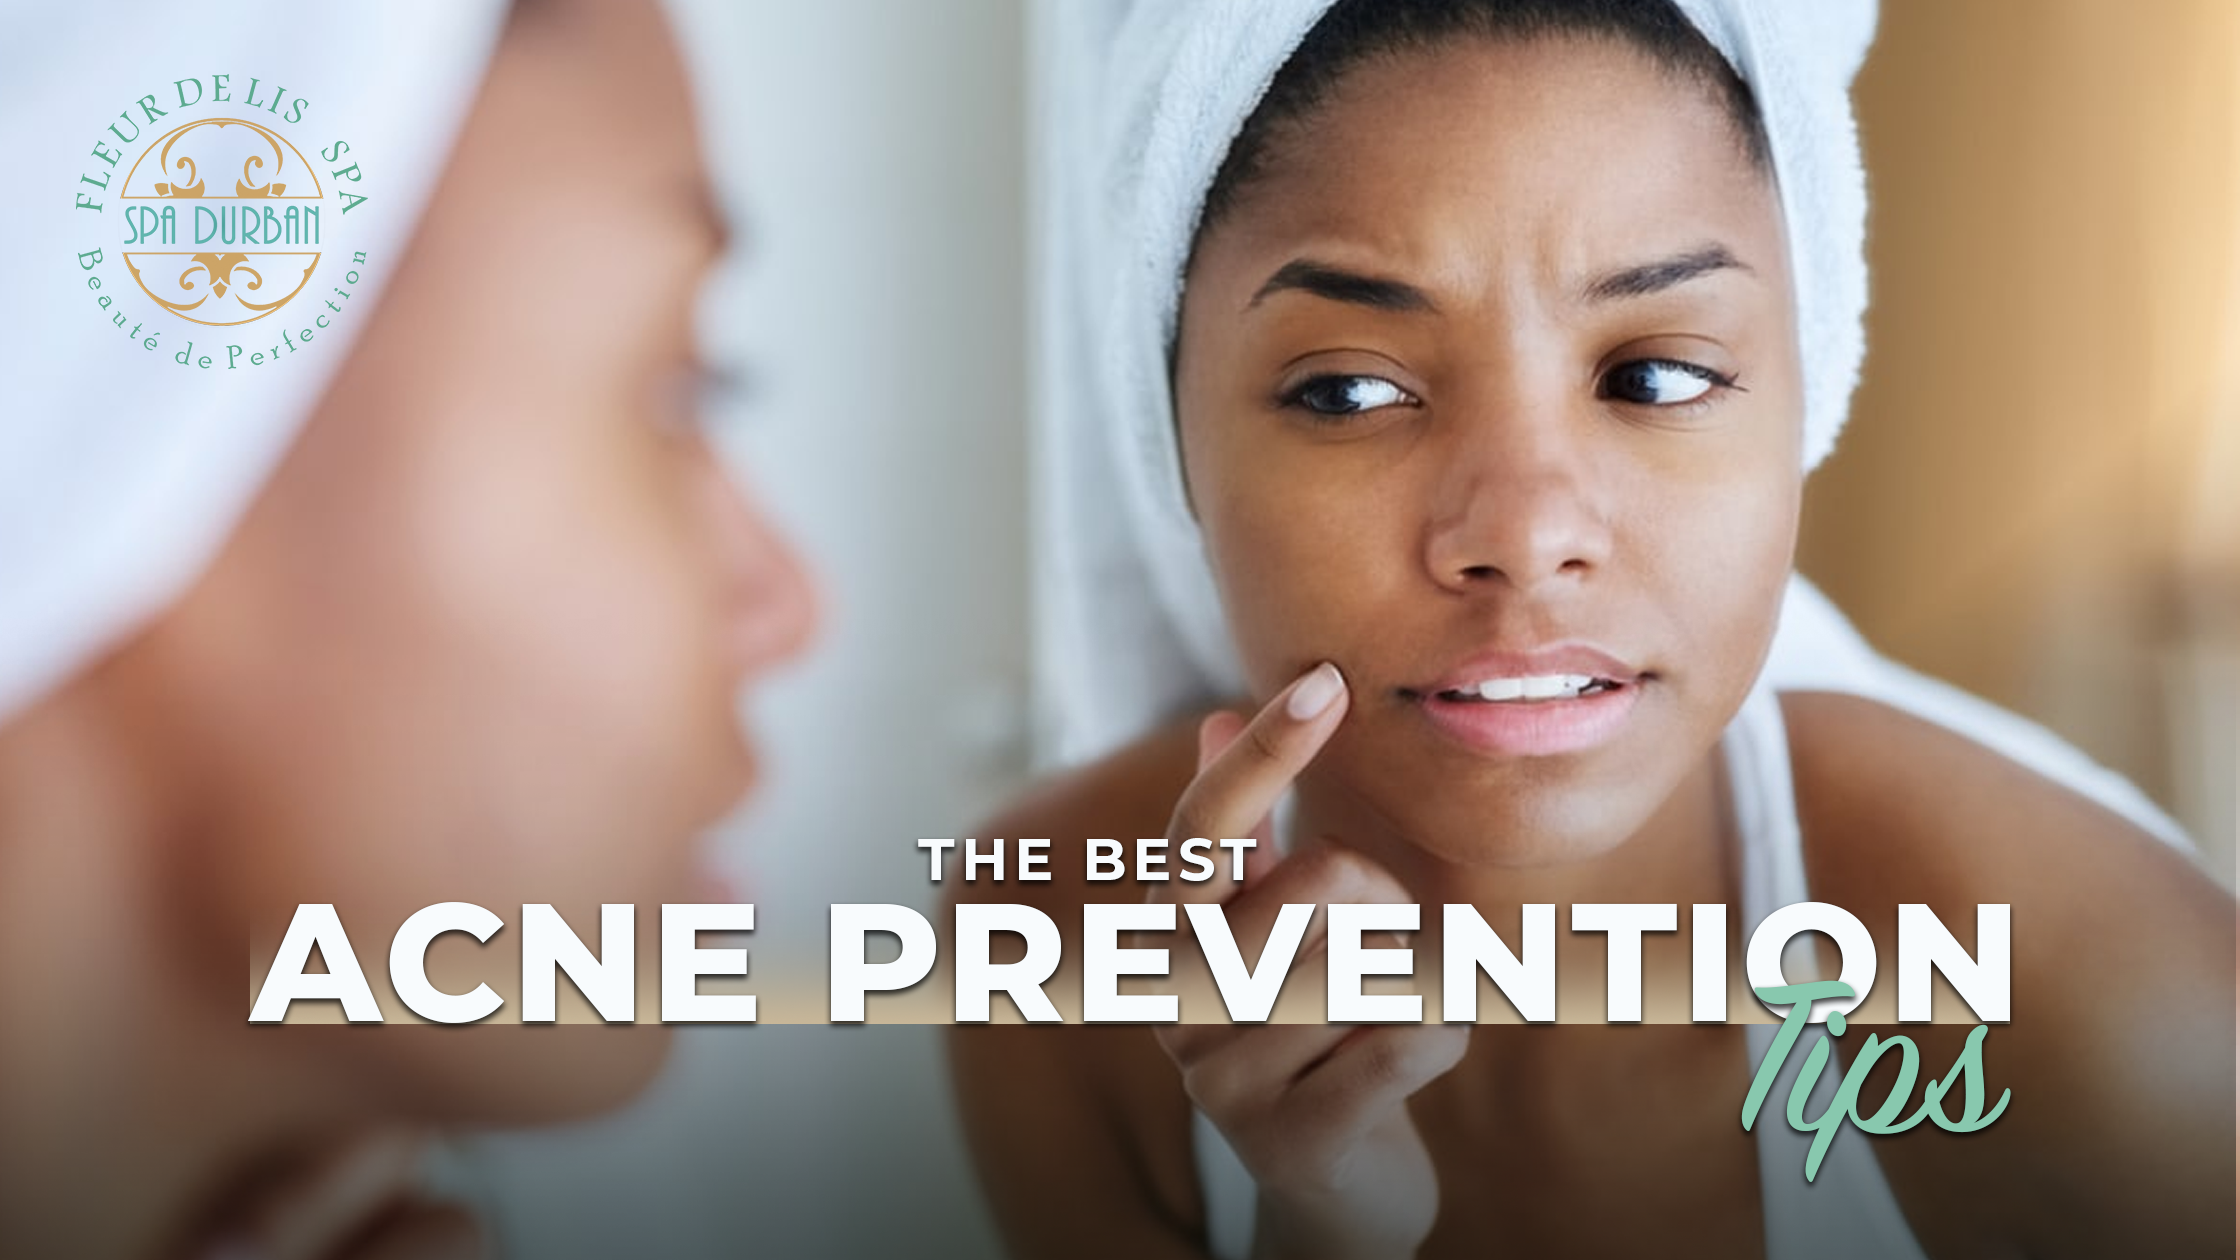 The Best Acne Prevention Tips